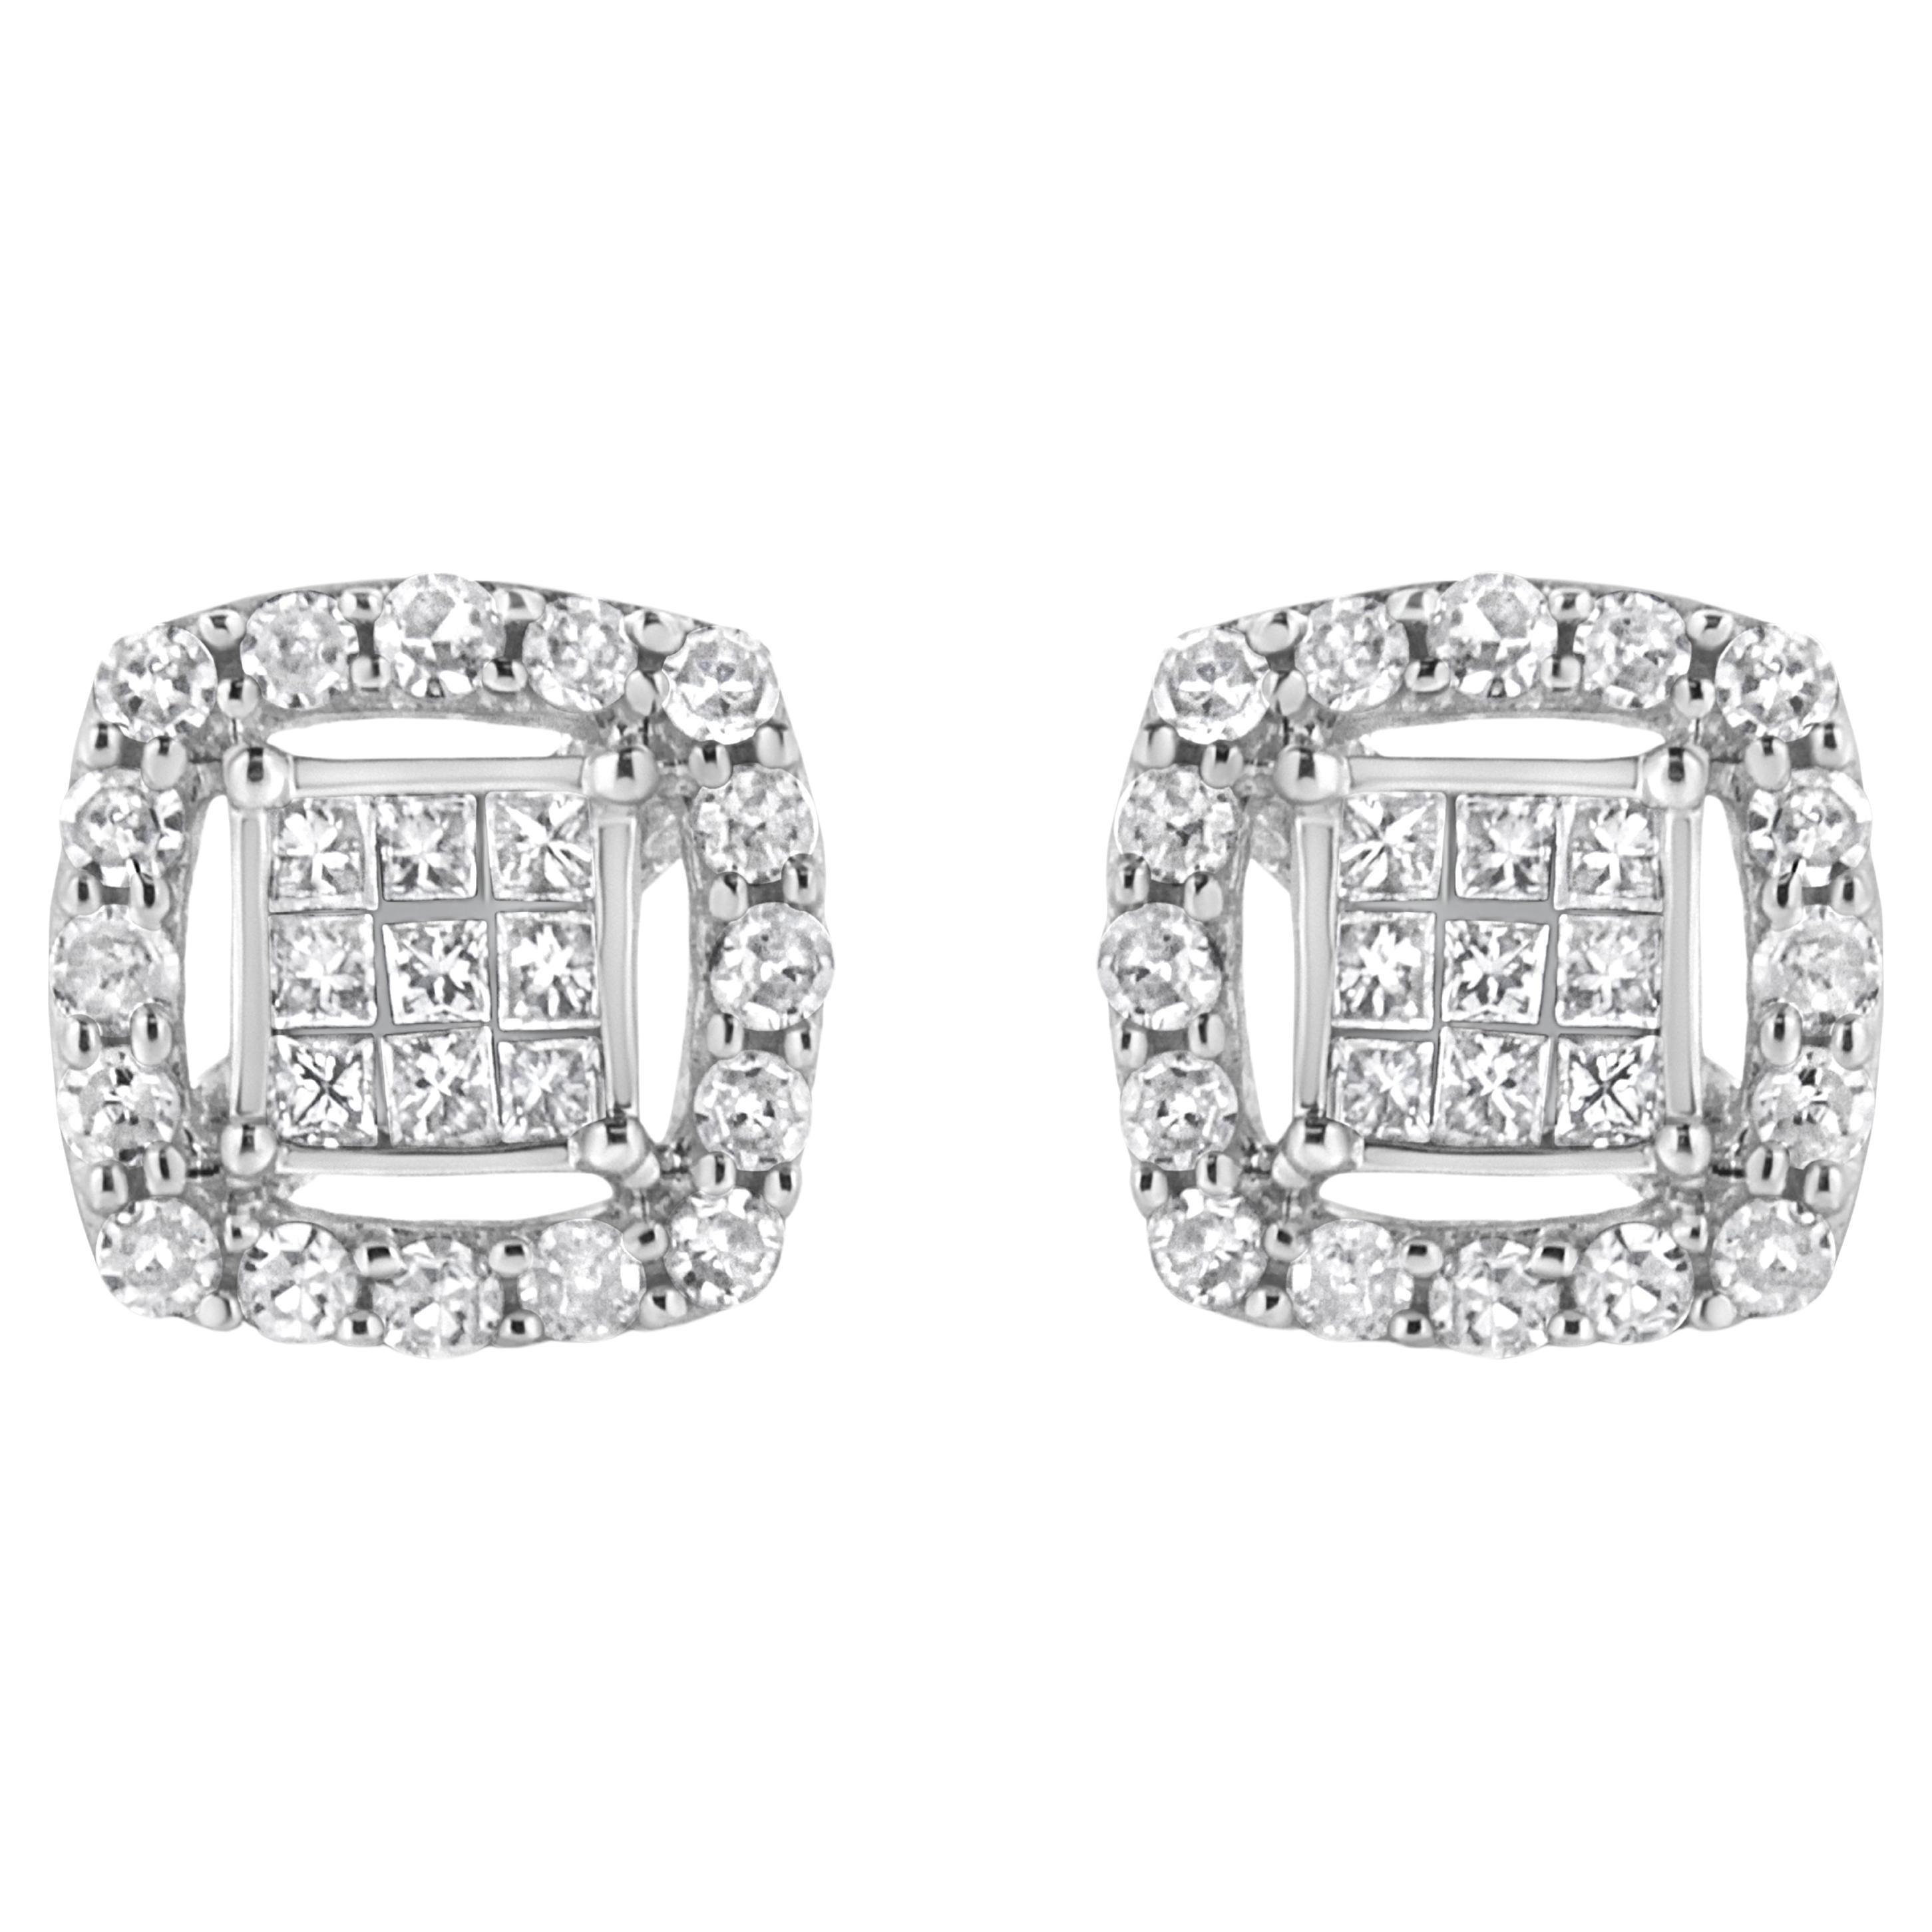 .925 Sterling Silver 1/2 Carat Round and Princess-Cut Diamond Stud Earrings